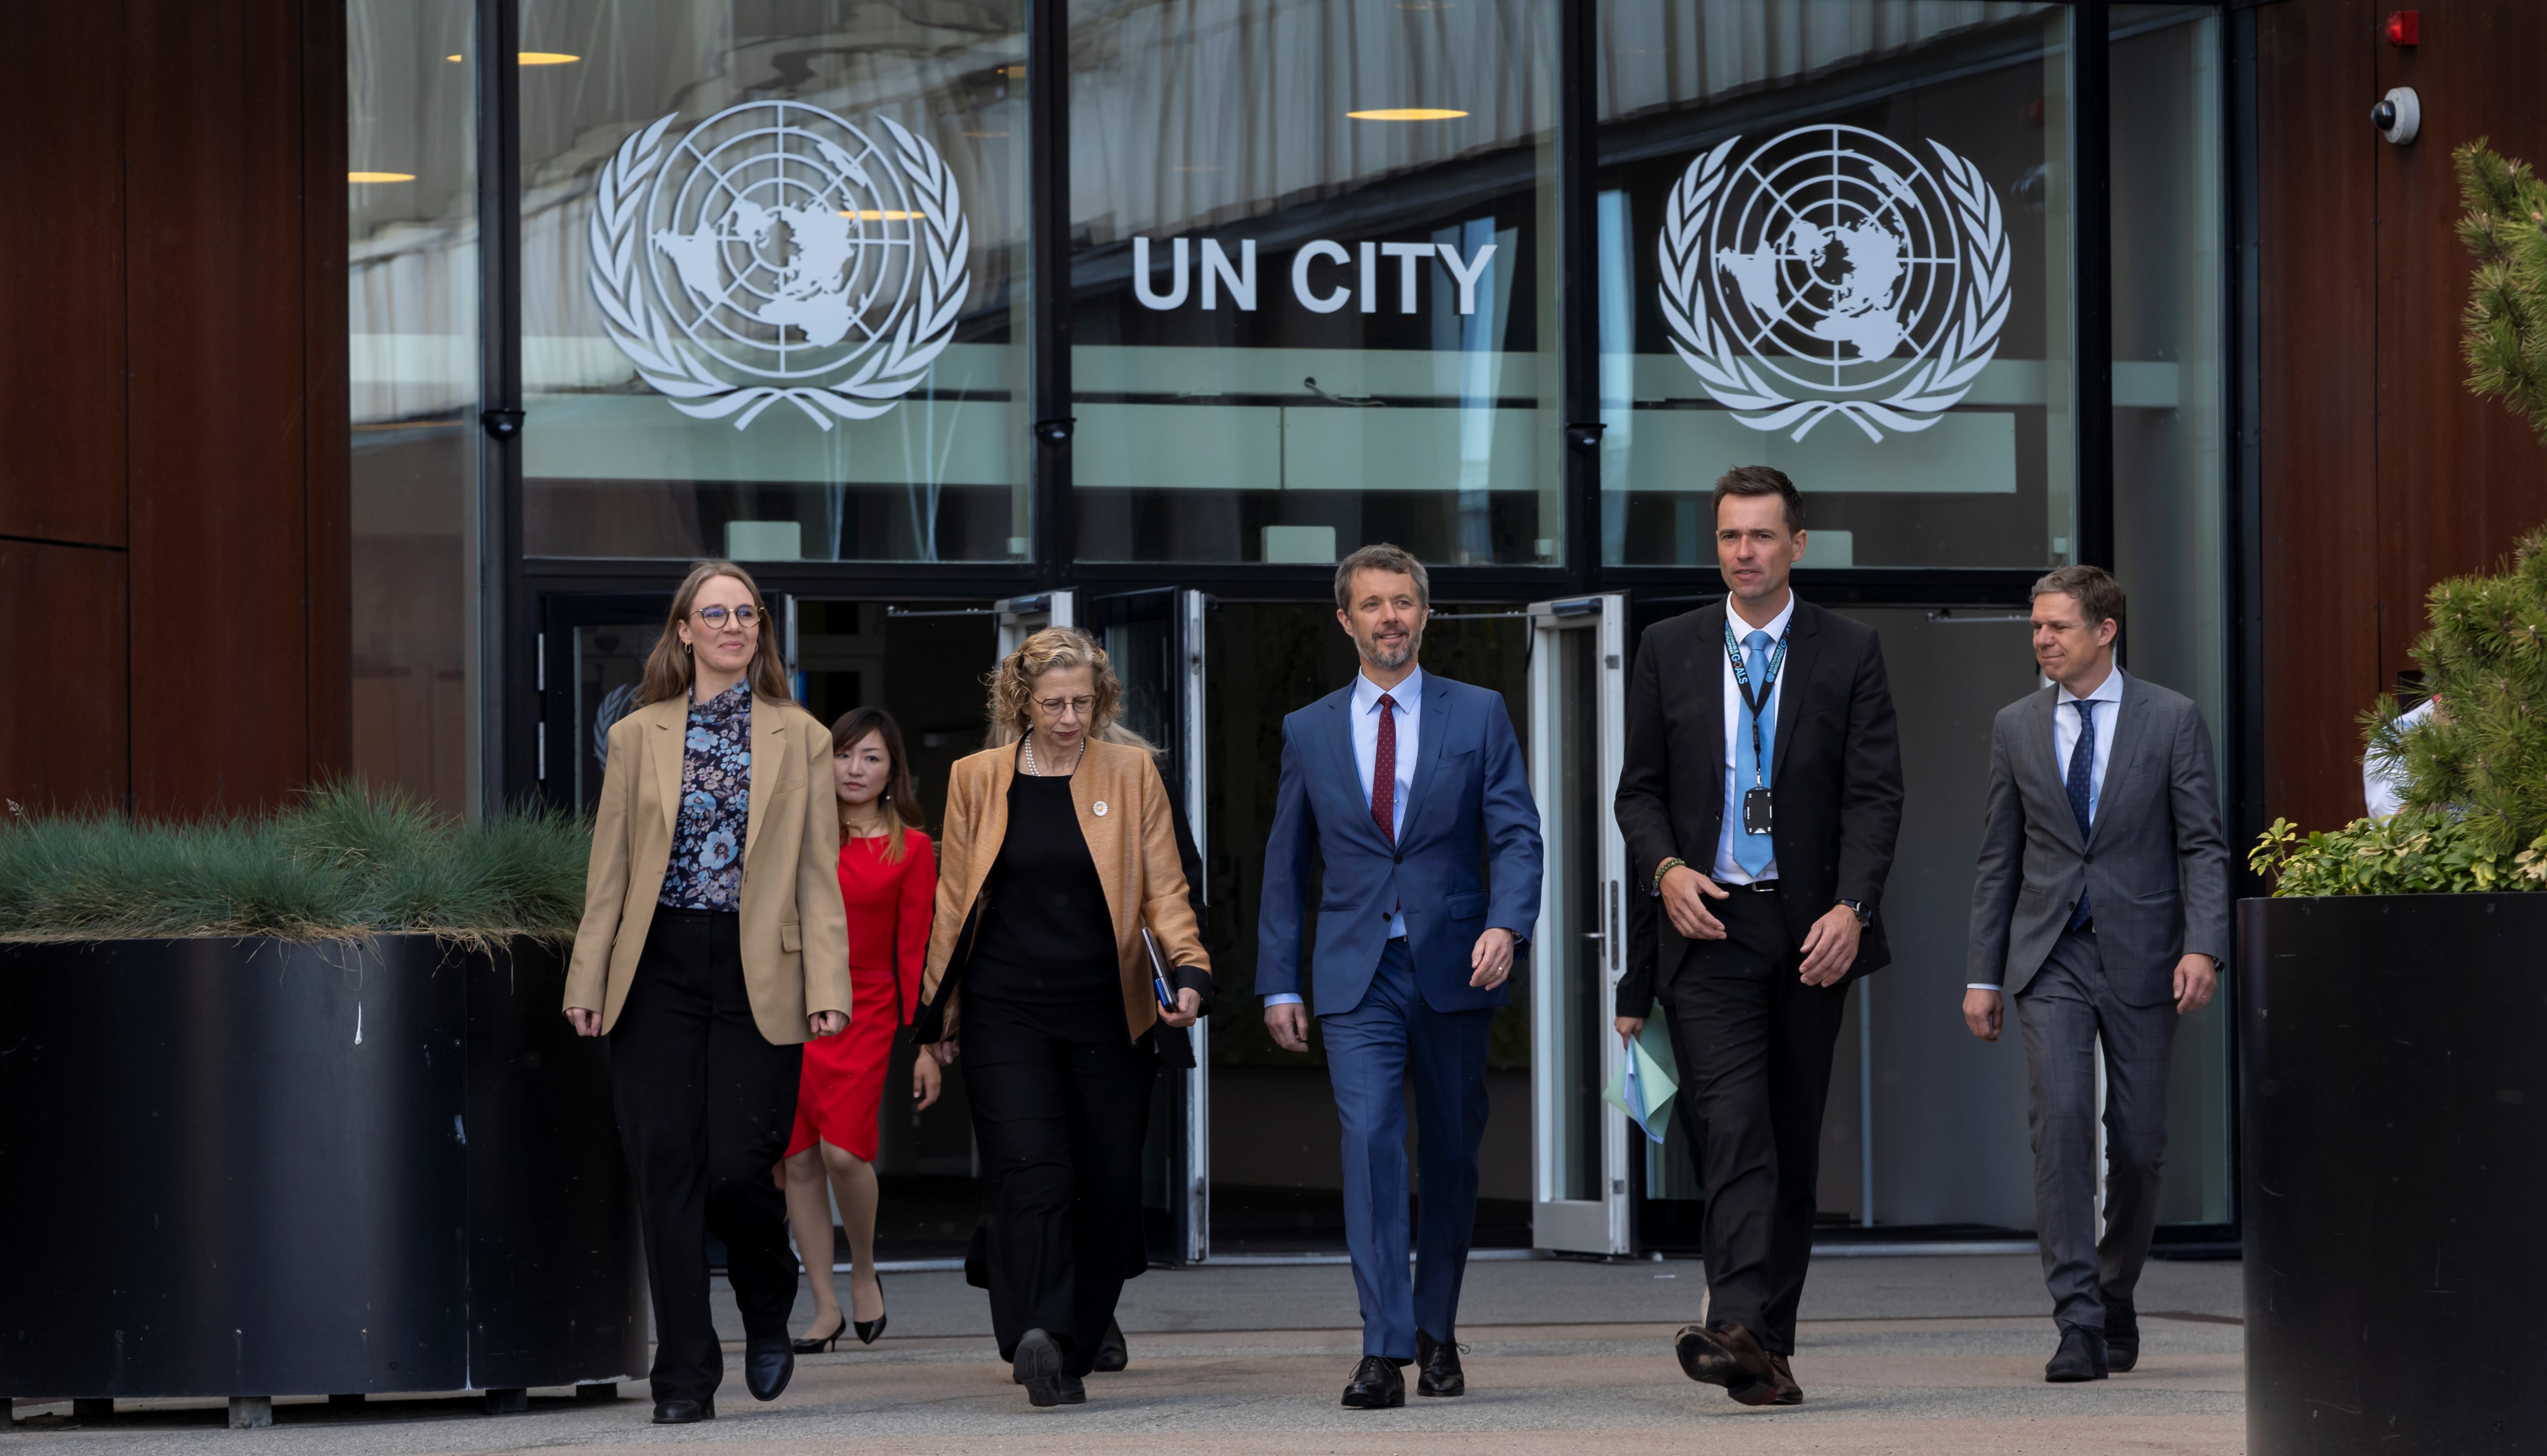 From left: Minister of Environment, Lea Wermelin, Executive Director Inger Andersen, HRH the Crown Prince and Head of UN City Communications Flemming Johannesen. Credit: Thomas Frøde